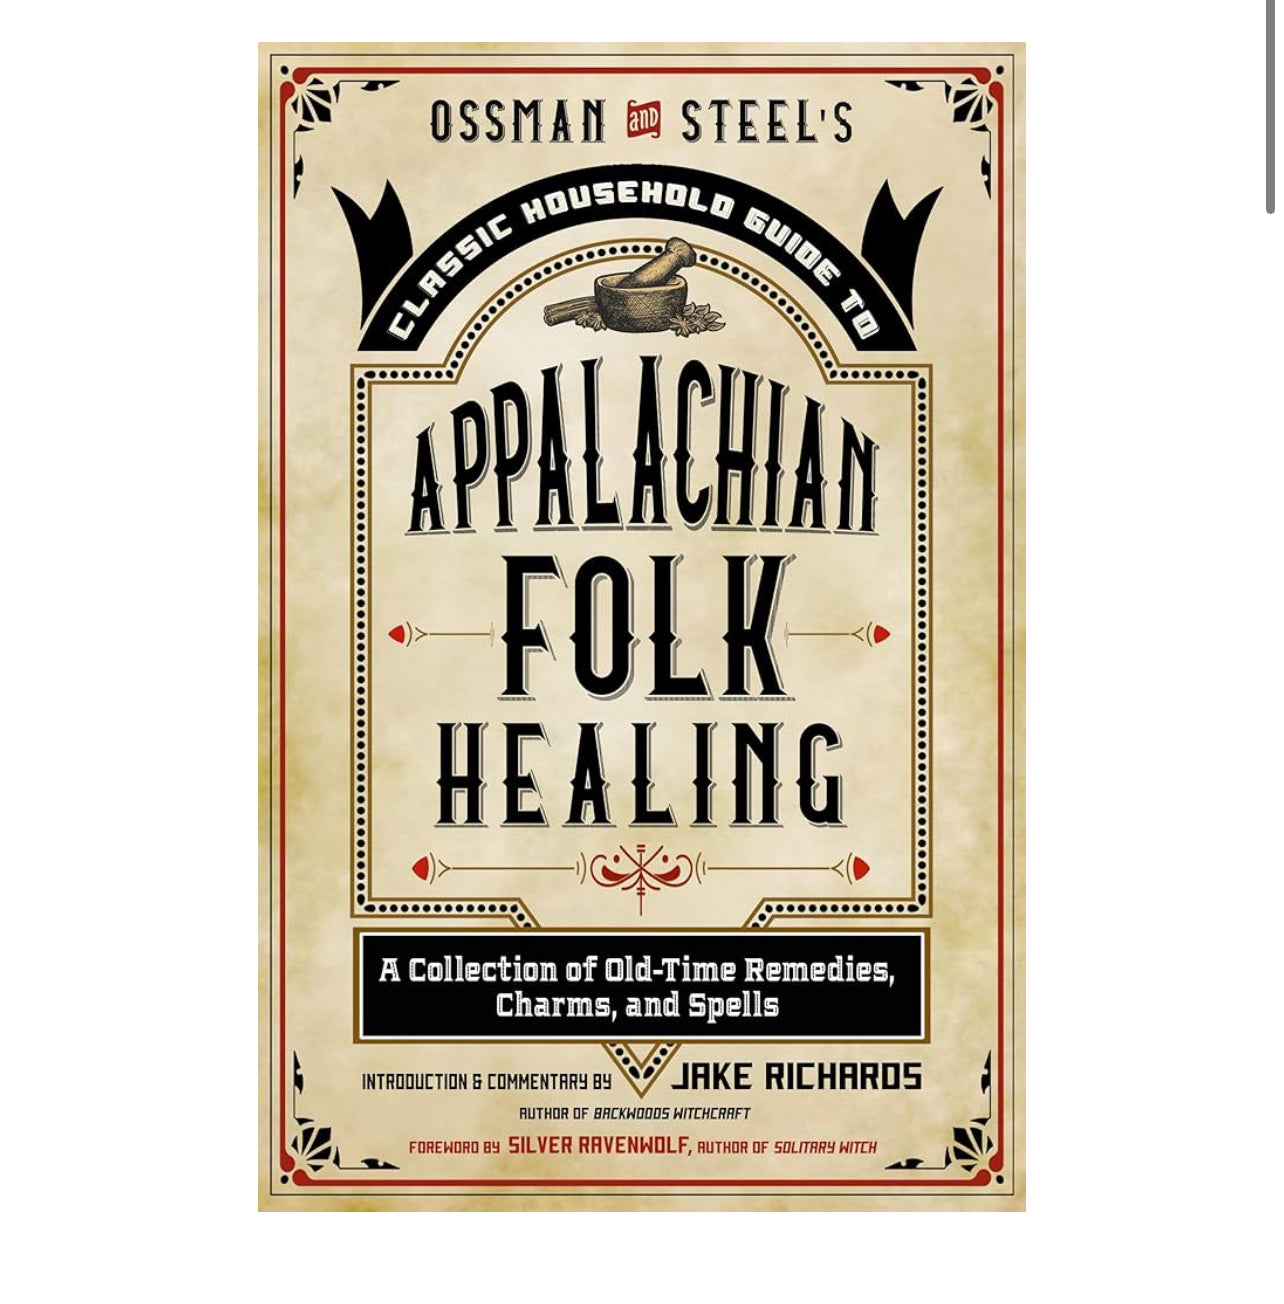 Ossman & Steel's Classic Household Guide to Appalachian Folk Healing: A Collection of Old-Time Remedies, Charms, and Spells